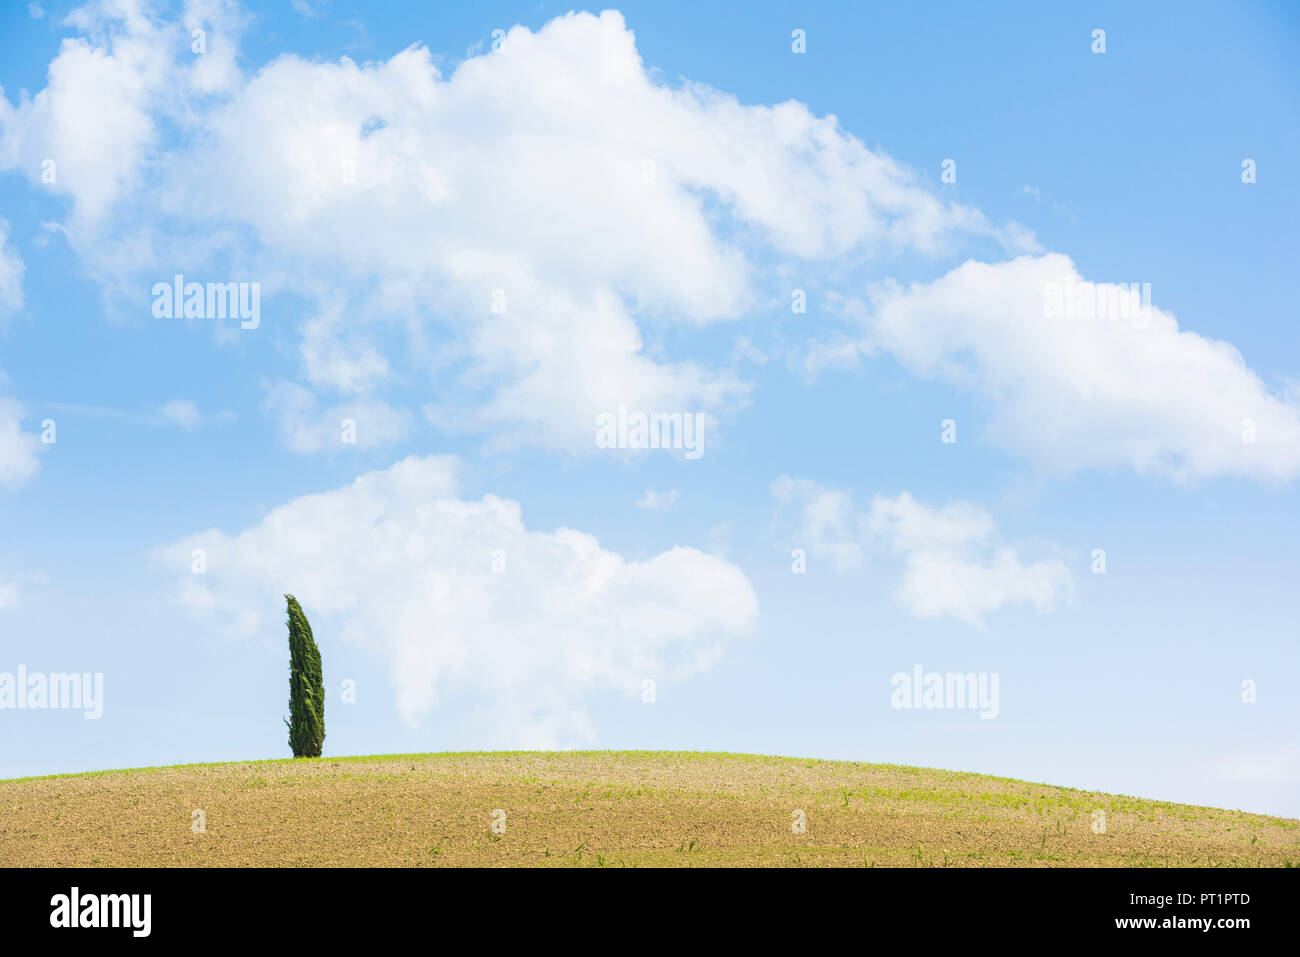 San Quirico d'Orcia, Val d'Orcia, Tuscany, Italy, Stock Photo